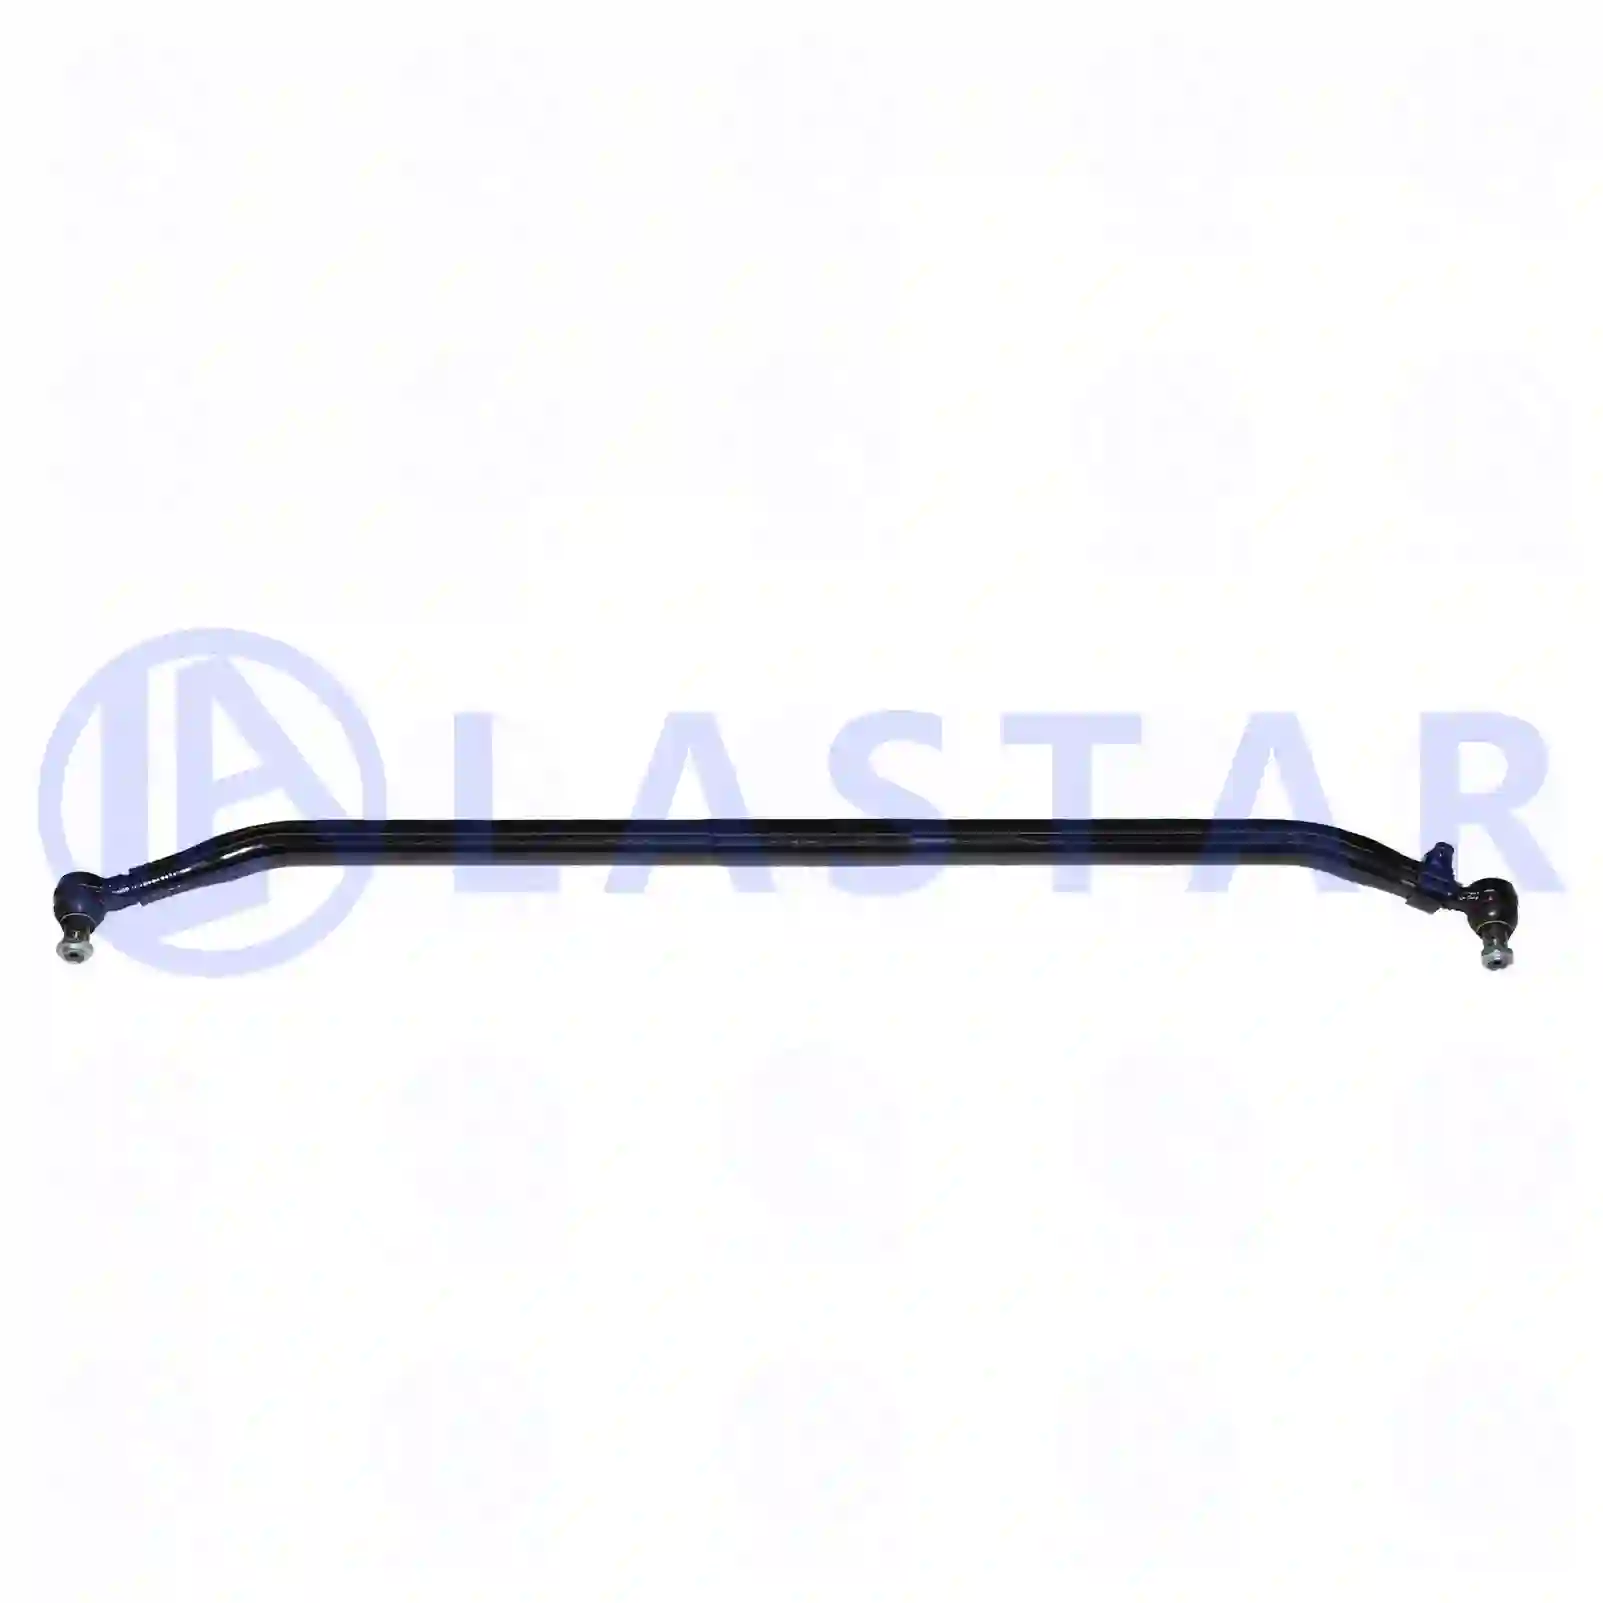 Track rod, 77730509, 1948590, 1997478, 2019496 ||  77730509 Lastar Spare Part | Truck Spare Parts, Auotomotive Spare Parts Track rod, 77730509, 1948590, 1997478, 2019496 ||  77730509 Lastar Spare Part | Truck Spare Parts, Auotomotive Spare Parts